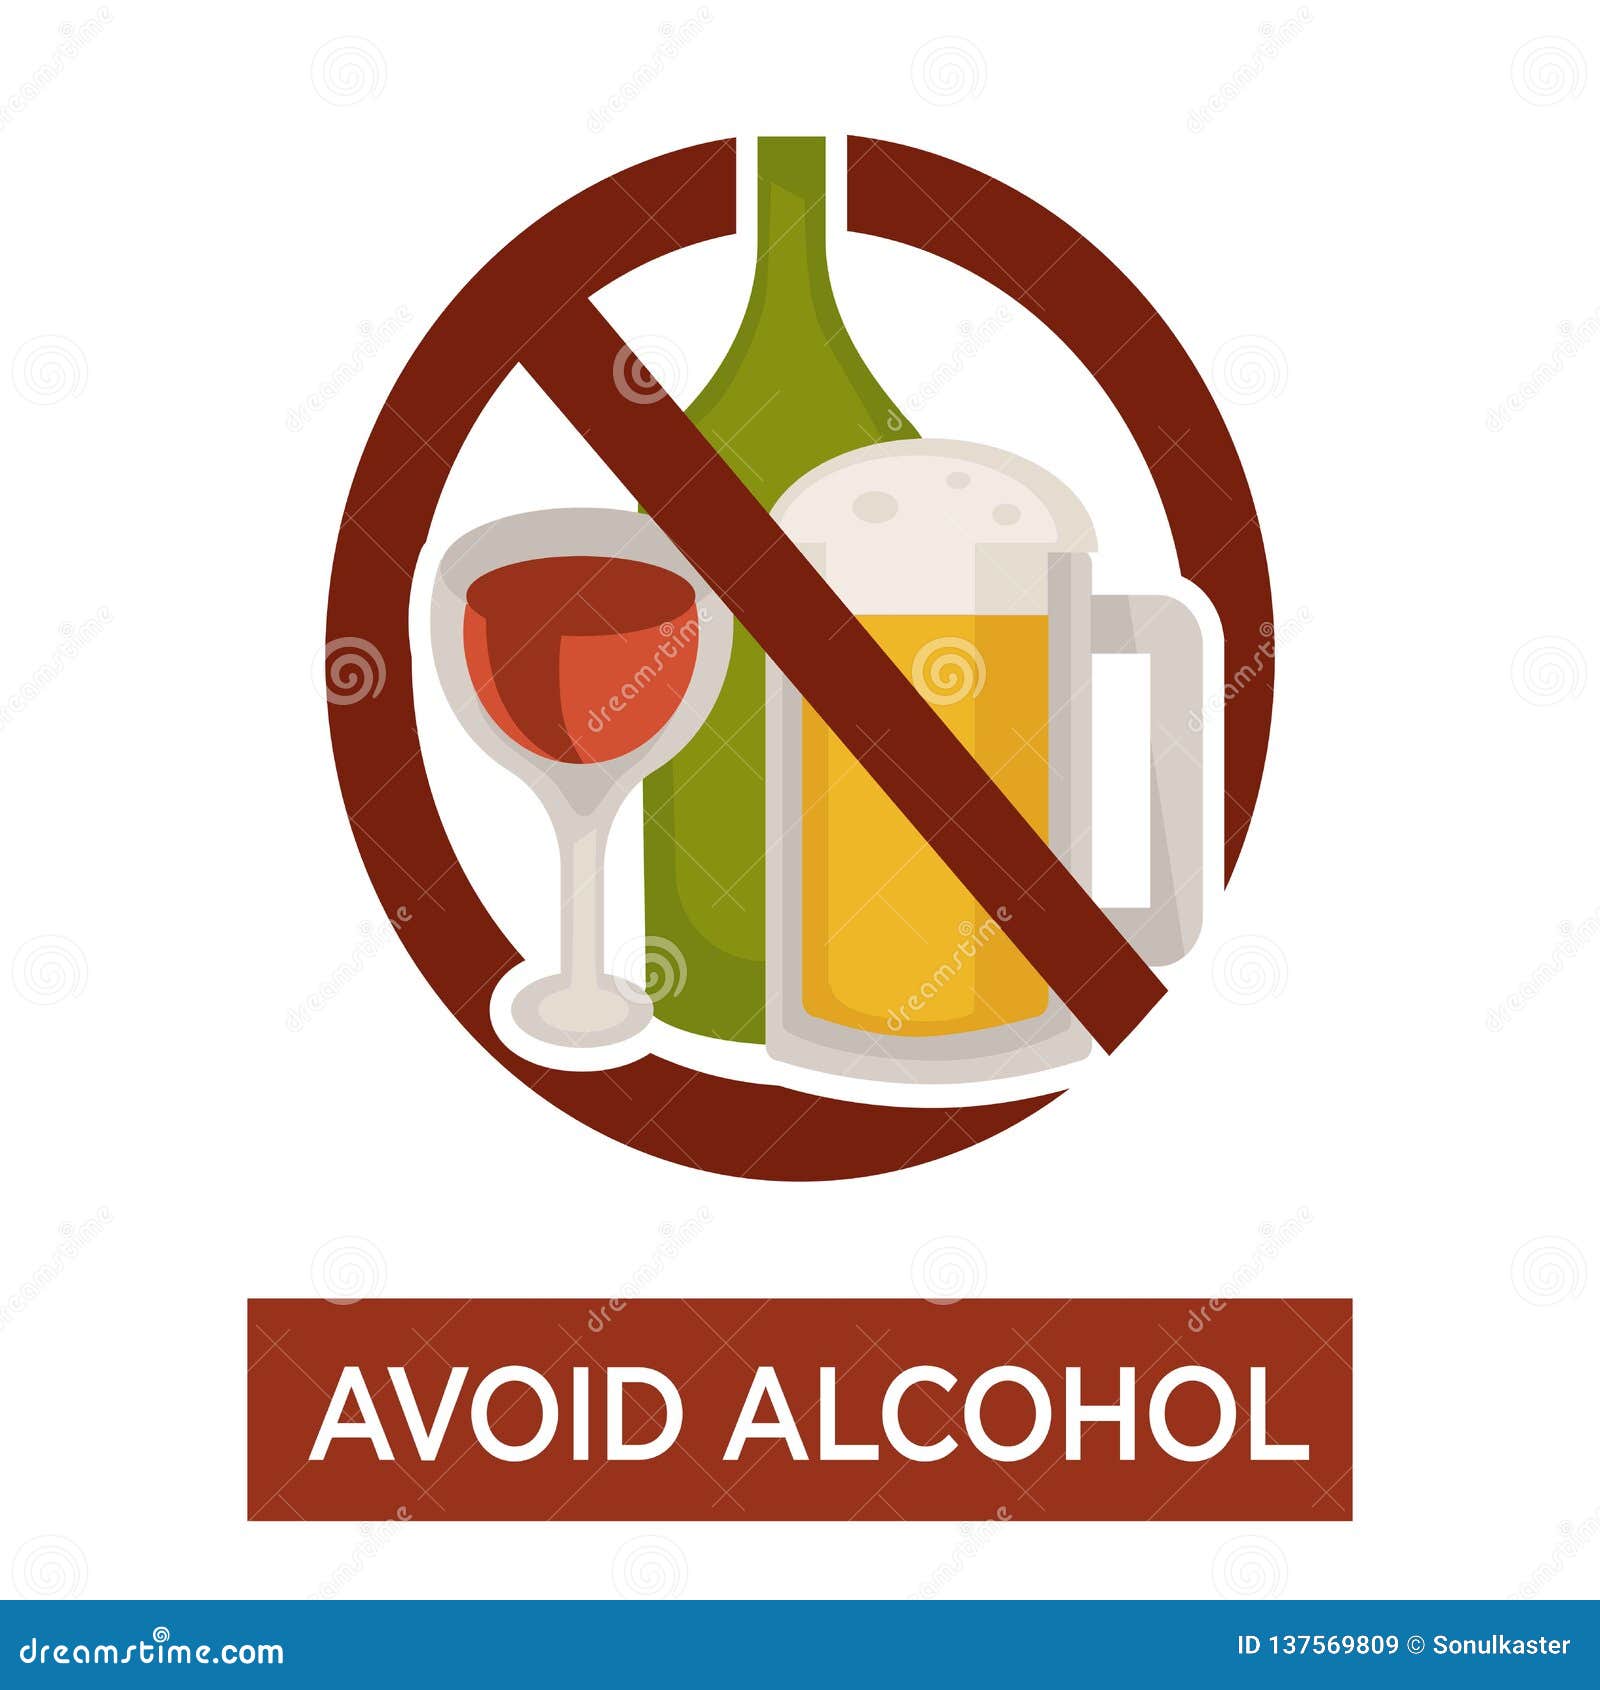 Avoid Alcohol if you want to live longer